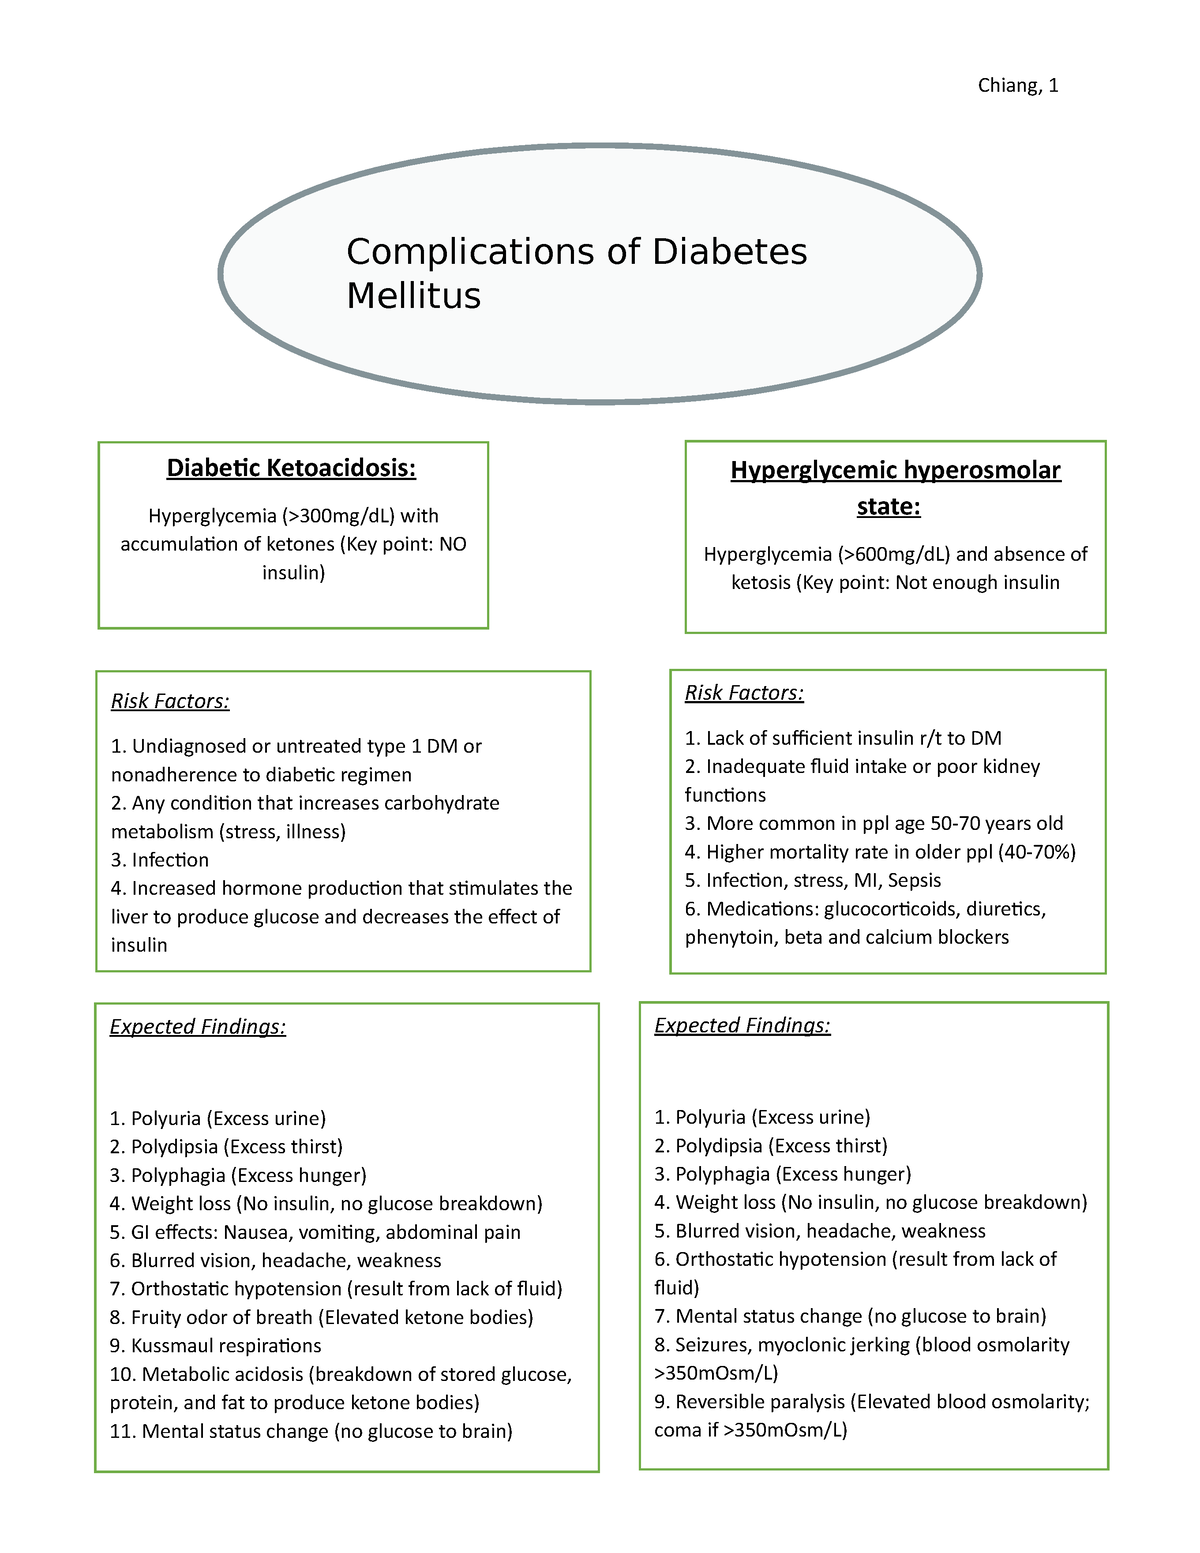 Concept Map Dka And Hhs Chiang 1 Complications Of Diabetes 8322